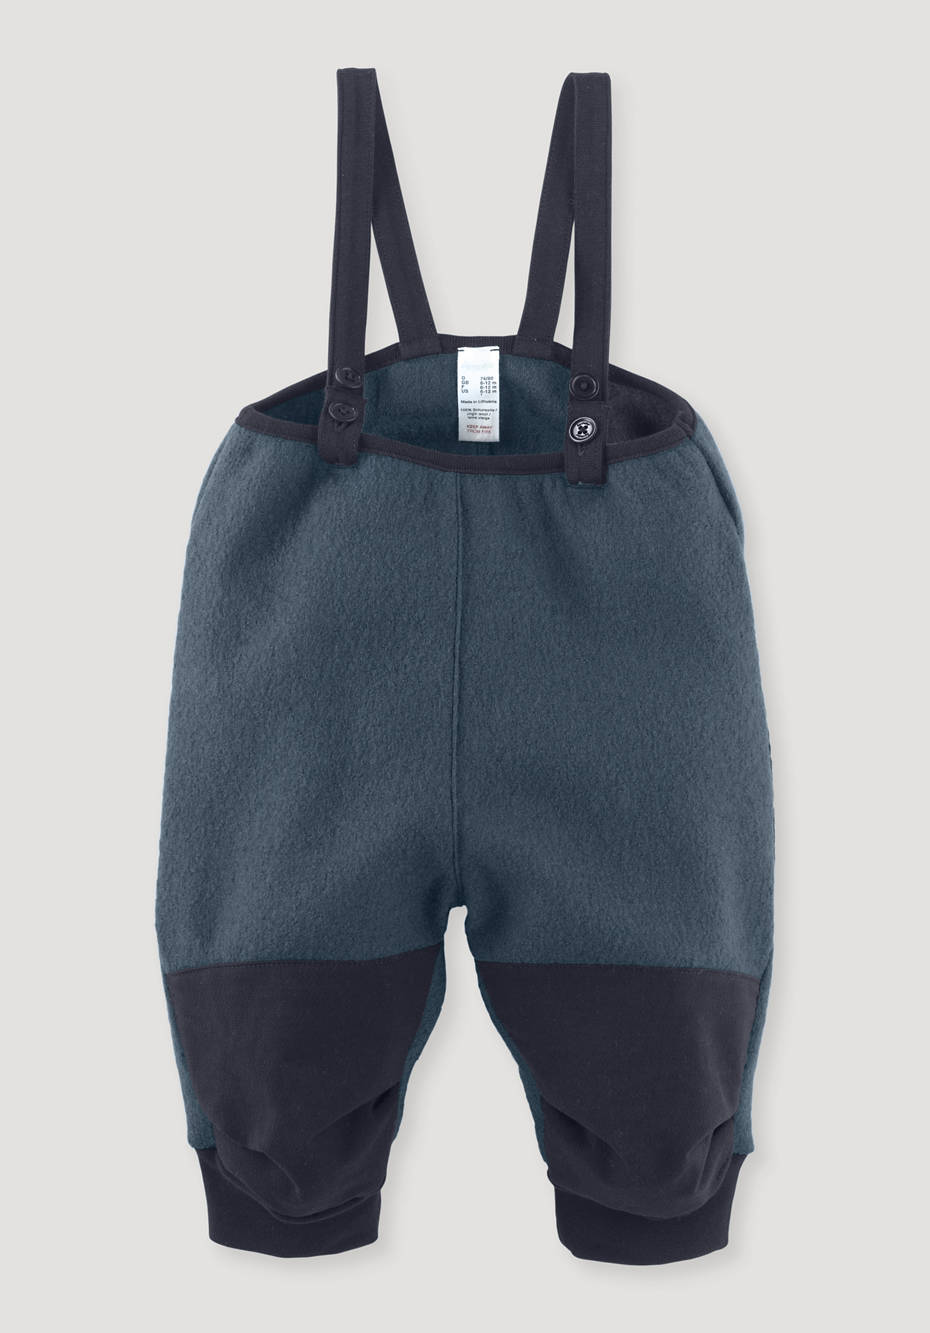 Boiled wool trousers made from pure organic merino wool